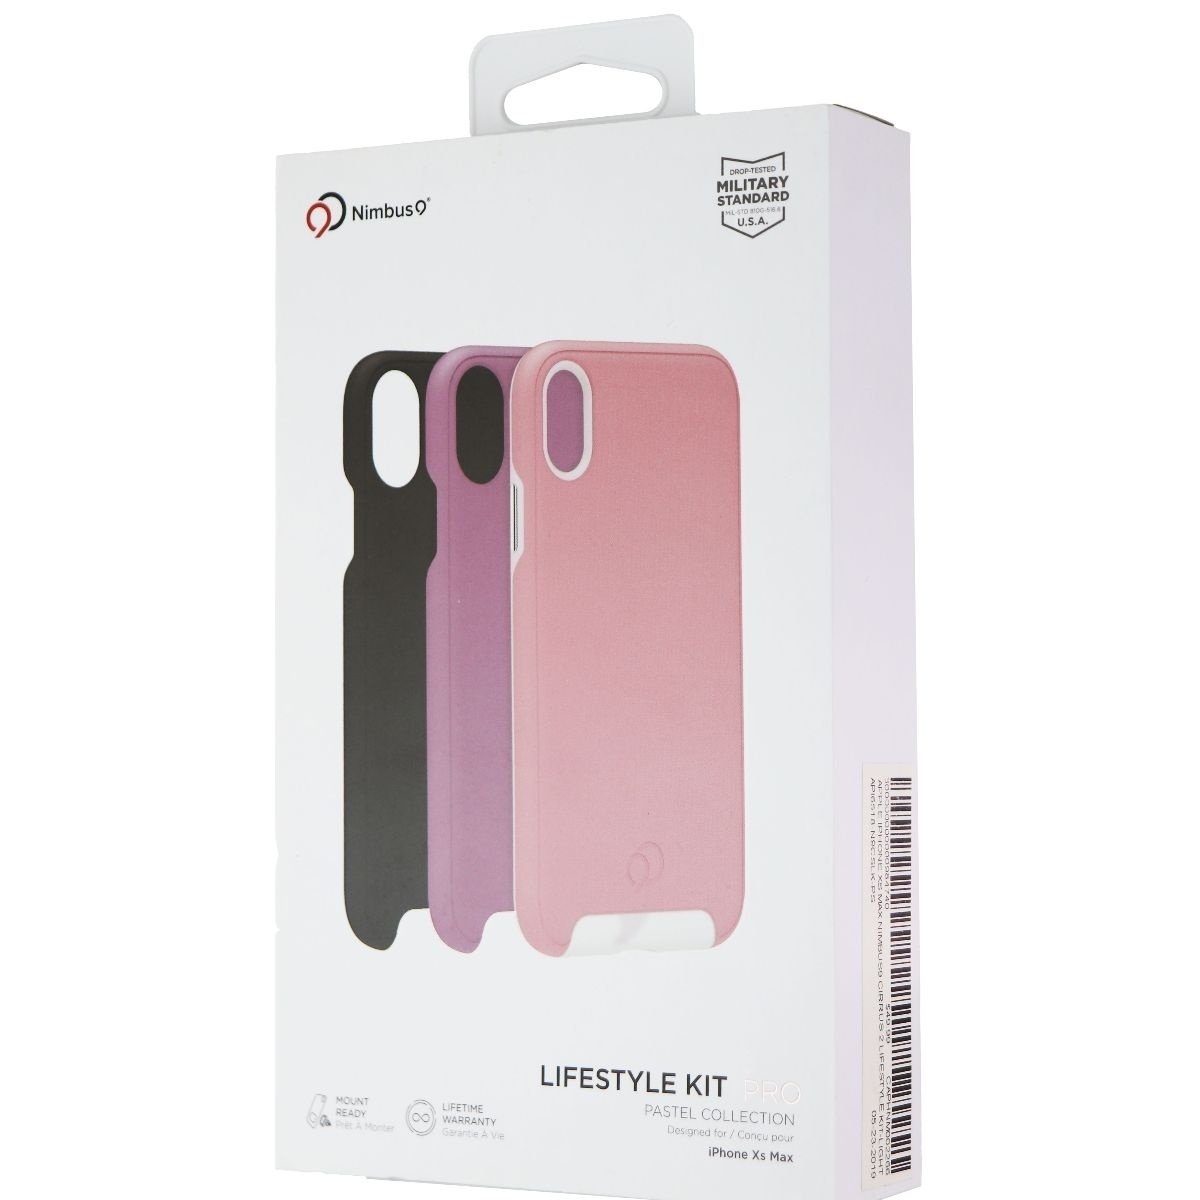 Nimbus9 LifeStyle Kit Pro Changeable Case For IPhone Xs Max - Pink/Purple/Black